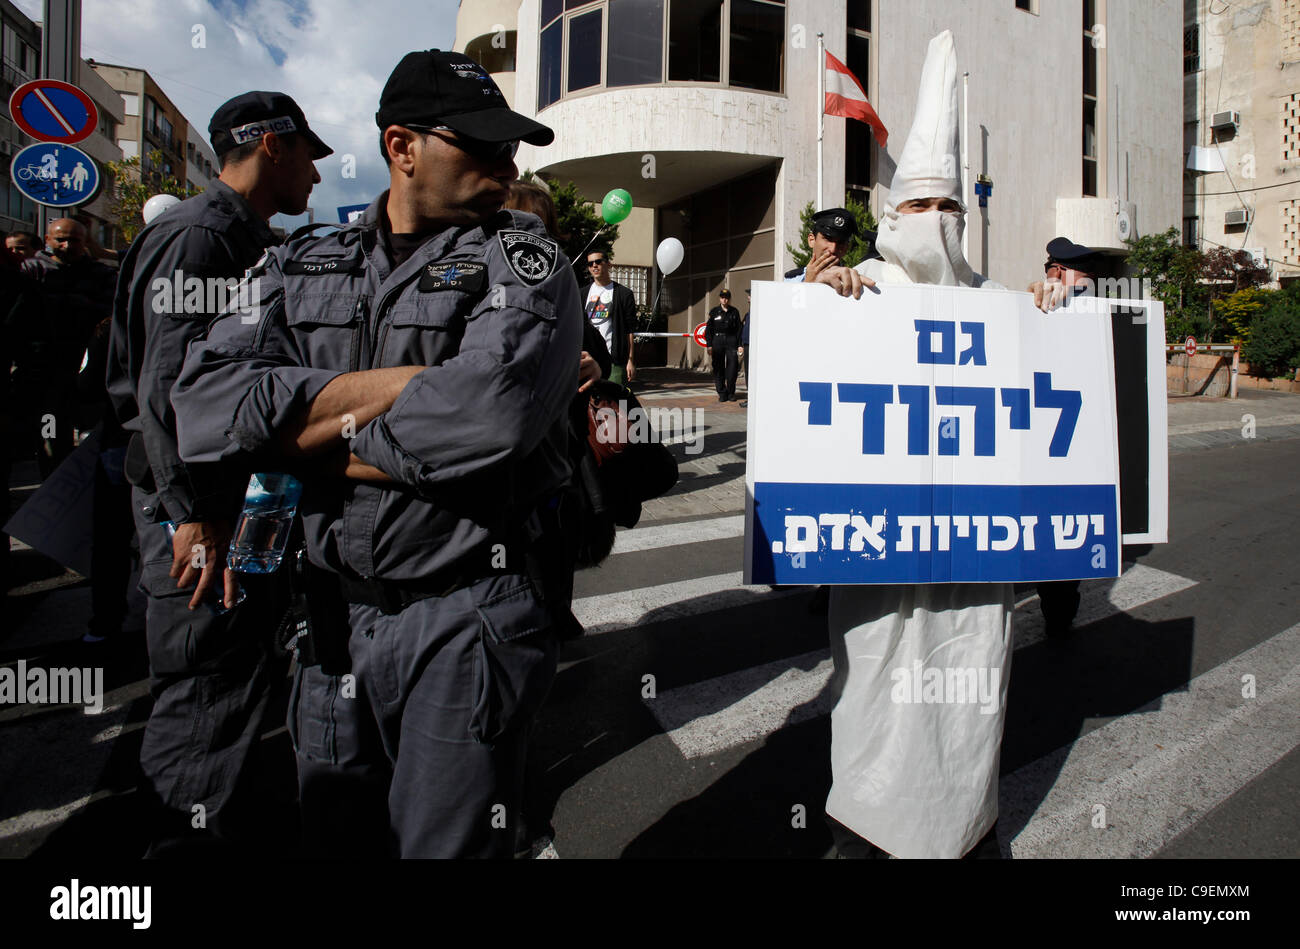 A right wing supporter dressed as Ku Klux Klan KKK member holds a sign in Hebrew reading 'A Jewish person has also human rights' as thousands of people participated in a rally to mark the international Human Rights Day in Tel Aviv Israel Stock Photo